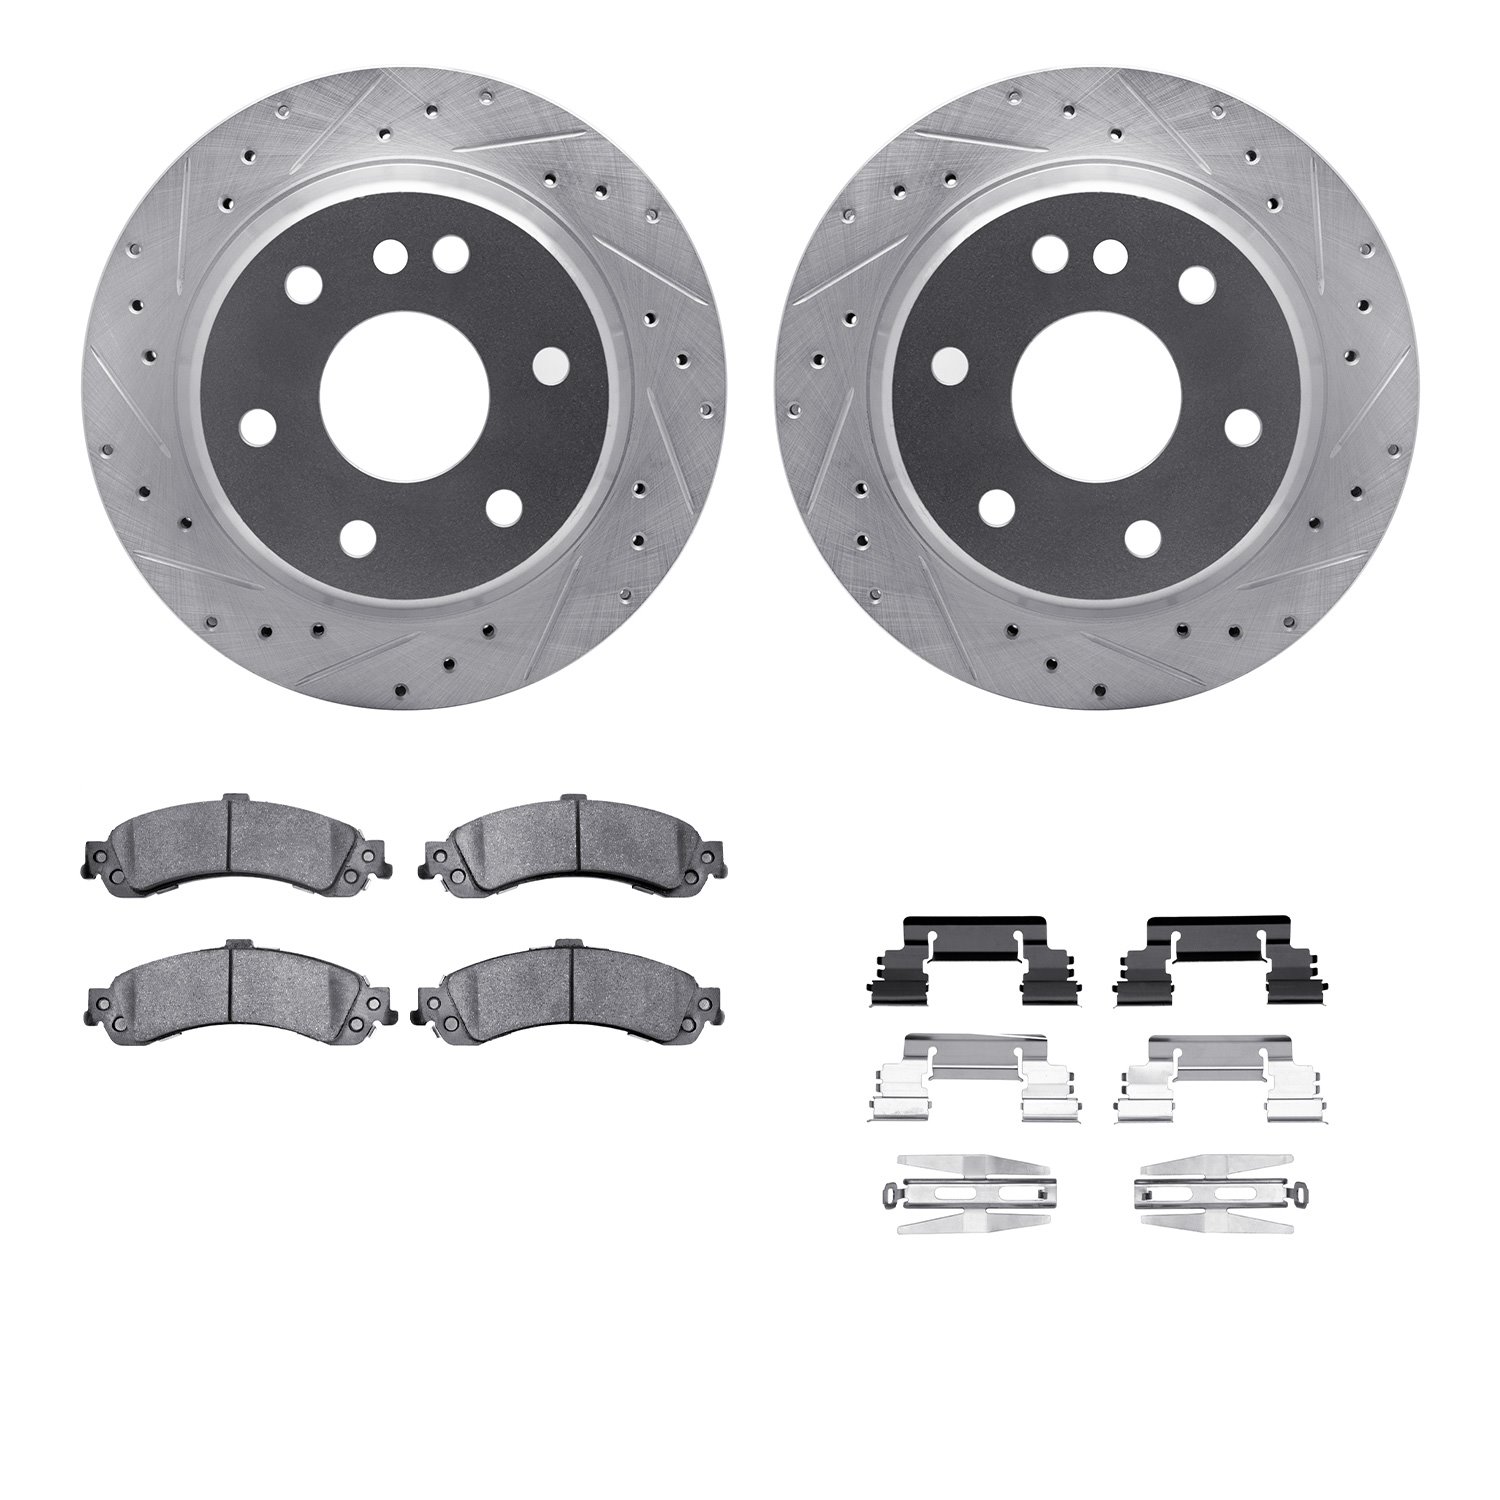 7412-48028 Drilled/Slotted Brake Rotors with Ultimate-Duty Brake Pads Kit & Hardware [Silver], 2000-2006 GM, Position: Rear